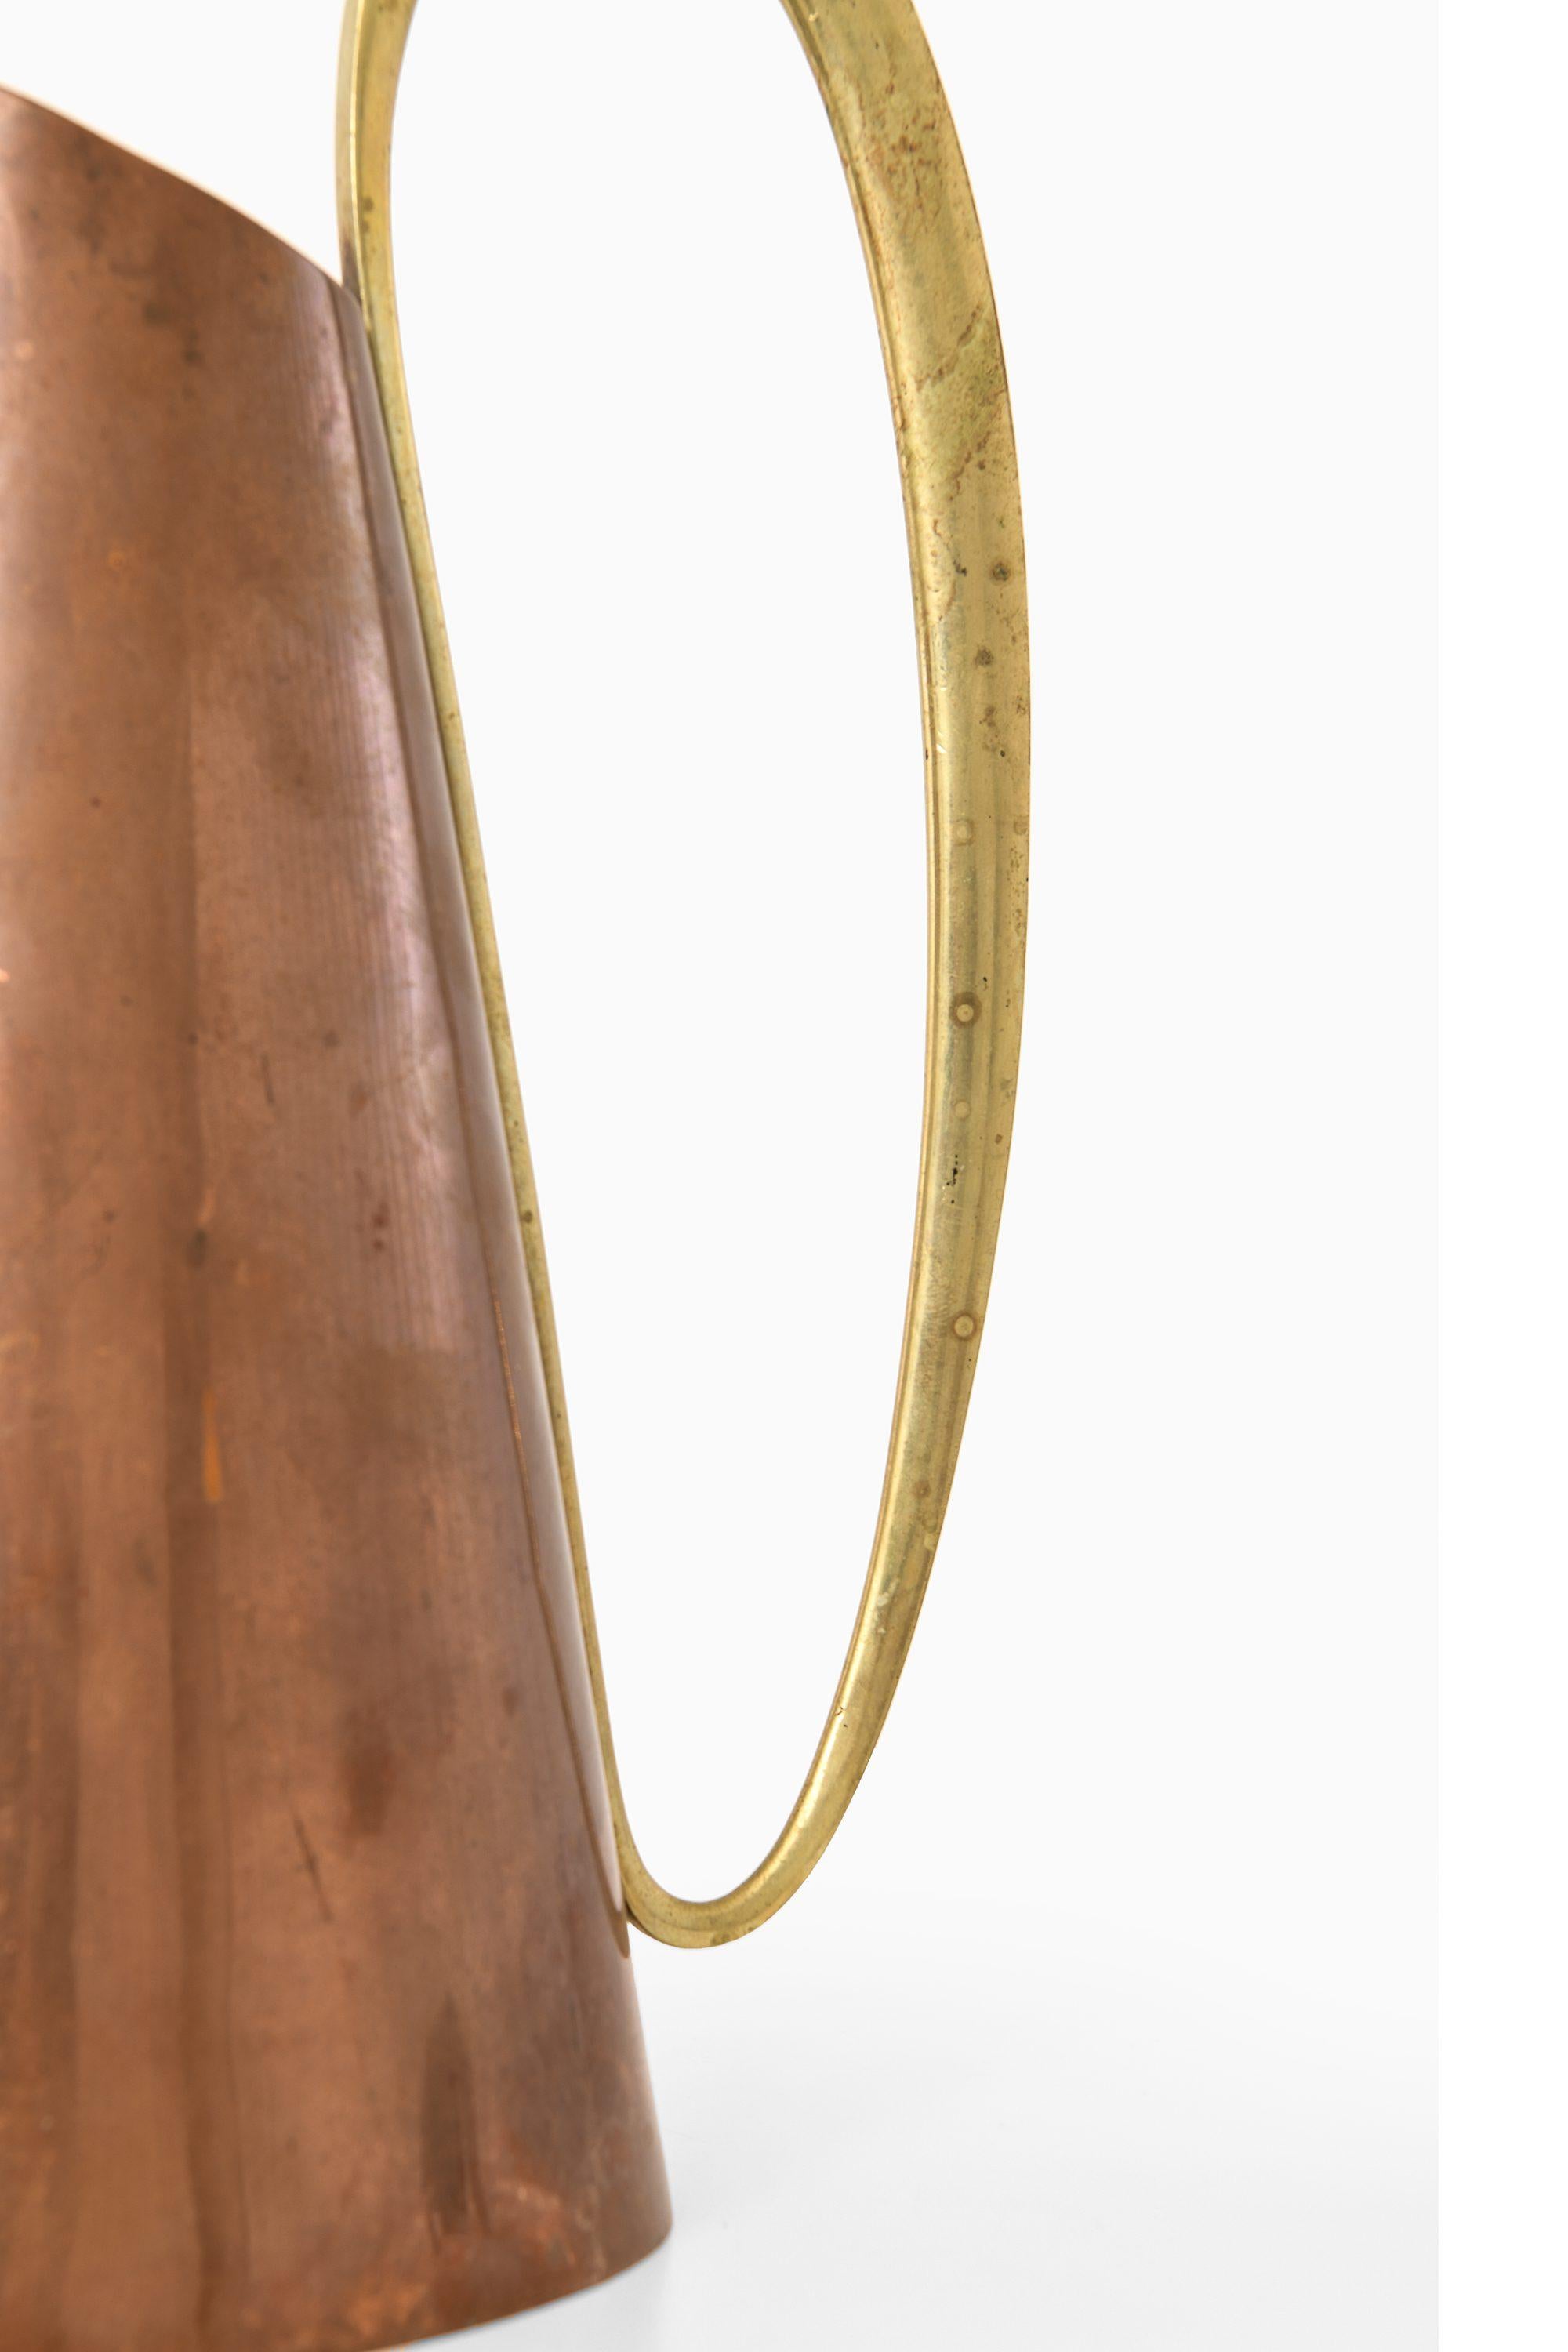 Mid-Century Modern Rare Watering Can in Brass and Copper by Carl Auböck, 1950's For Sale